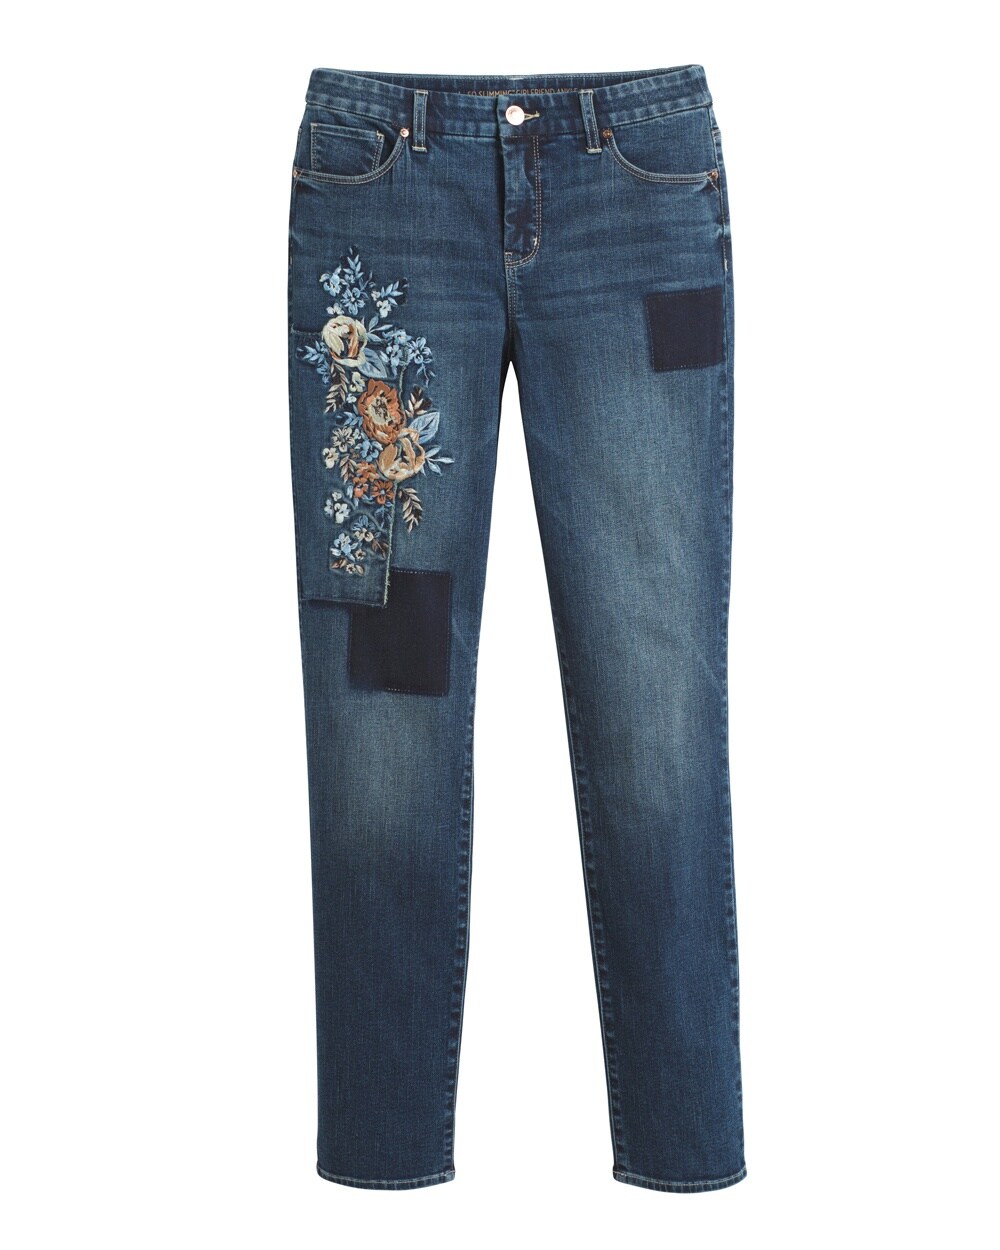 So Slimming Floral Patchwork Girlfriend Jeans - Chico's